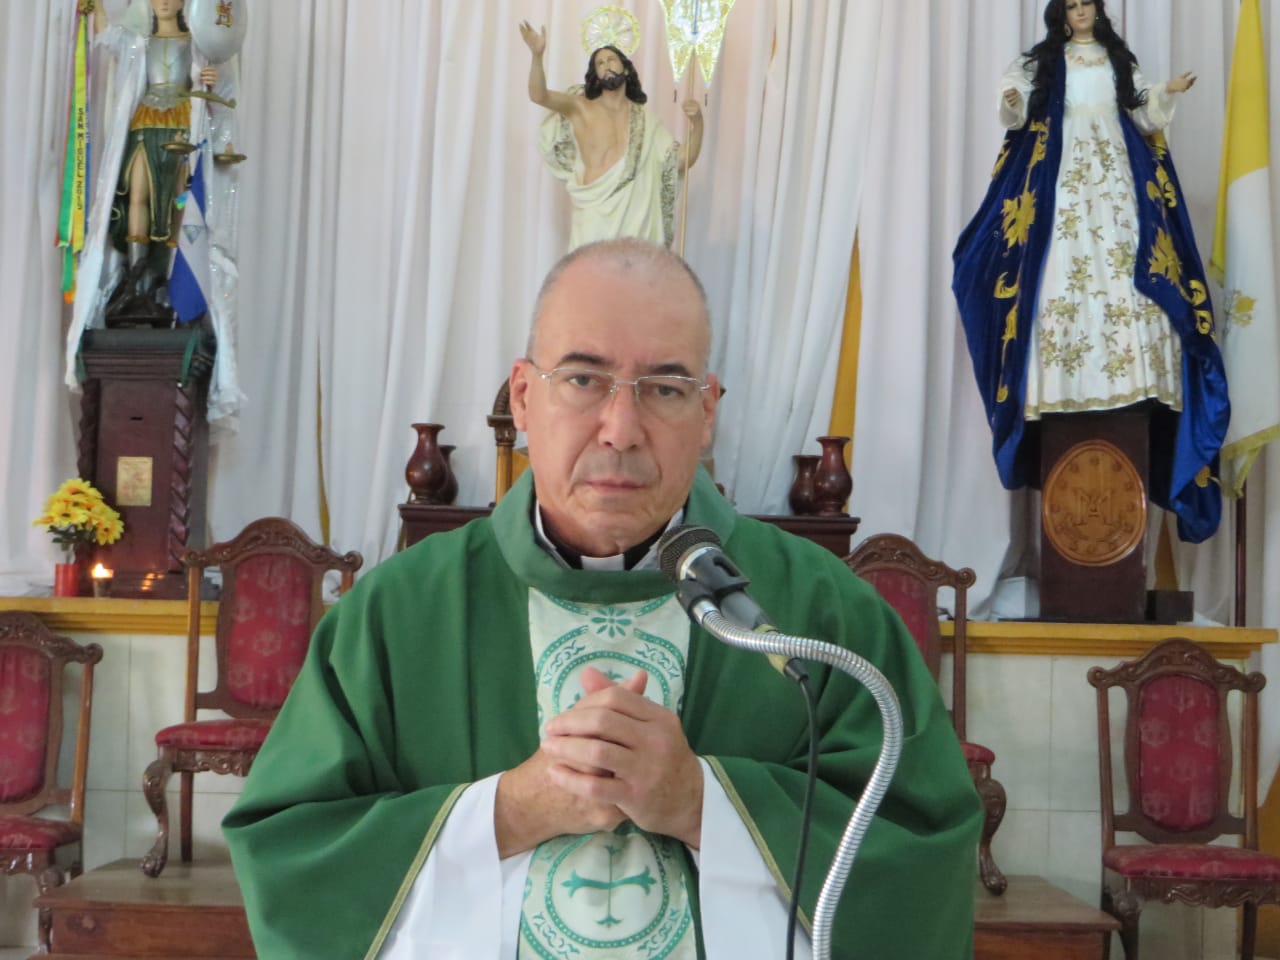 Father Edwing Román: "The authority received from God is not given to the enemies of God"